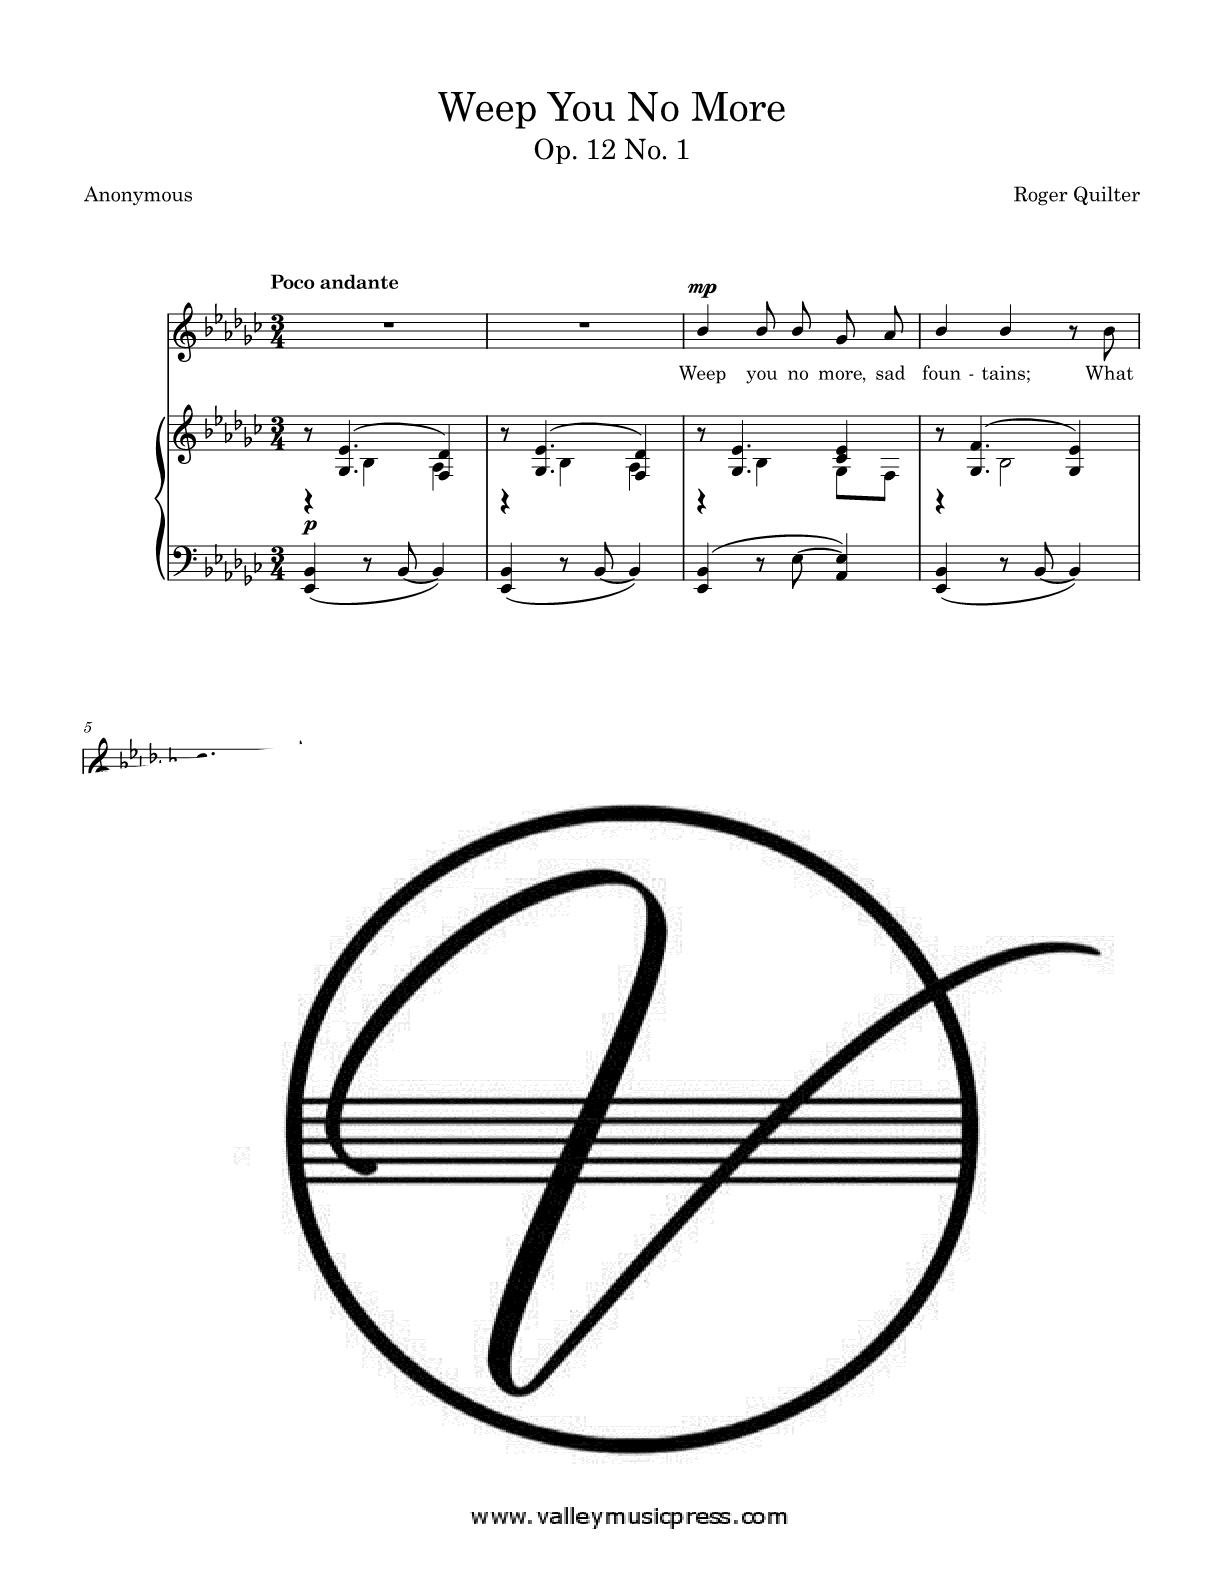 Quilter - Weep You No More Op. 12 No. 1 (Voice) - Click Image to Close